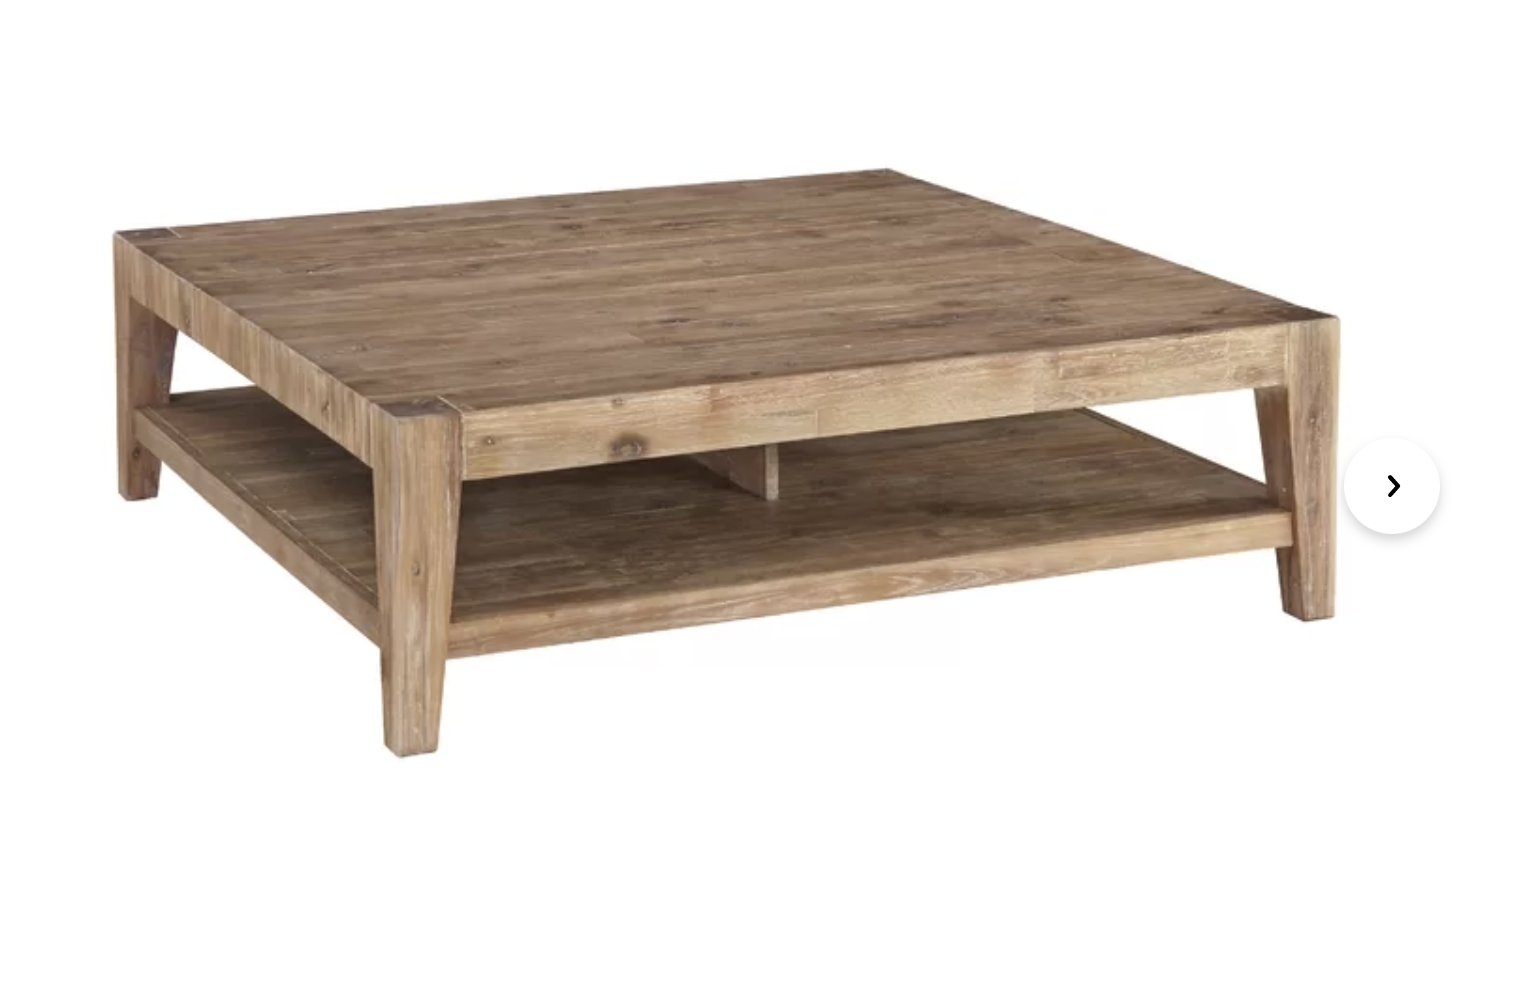 Savannah Solid Wood Coffee Table with Storage - IN STOCK 6/8/21 - Image 0